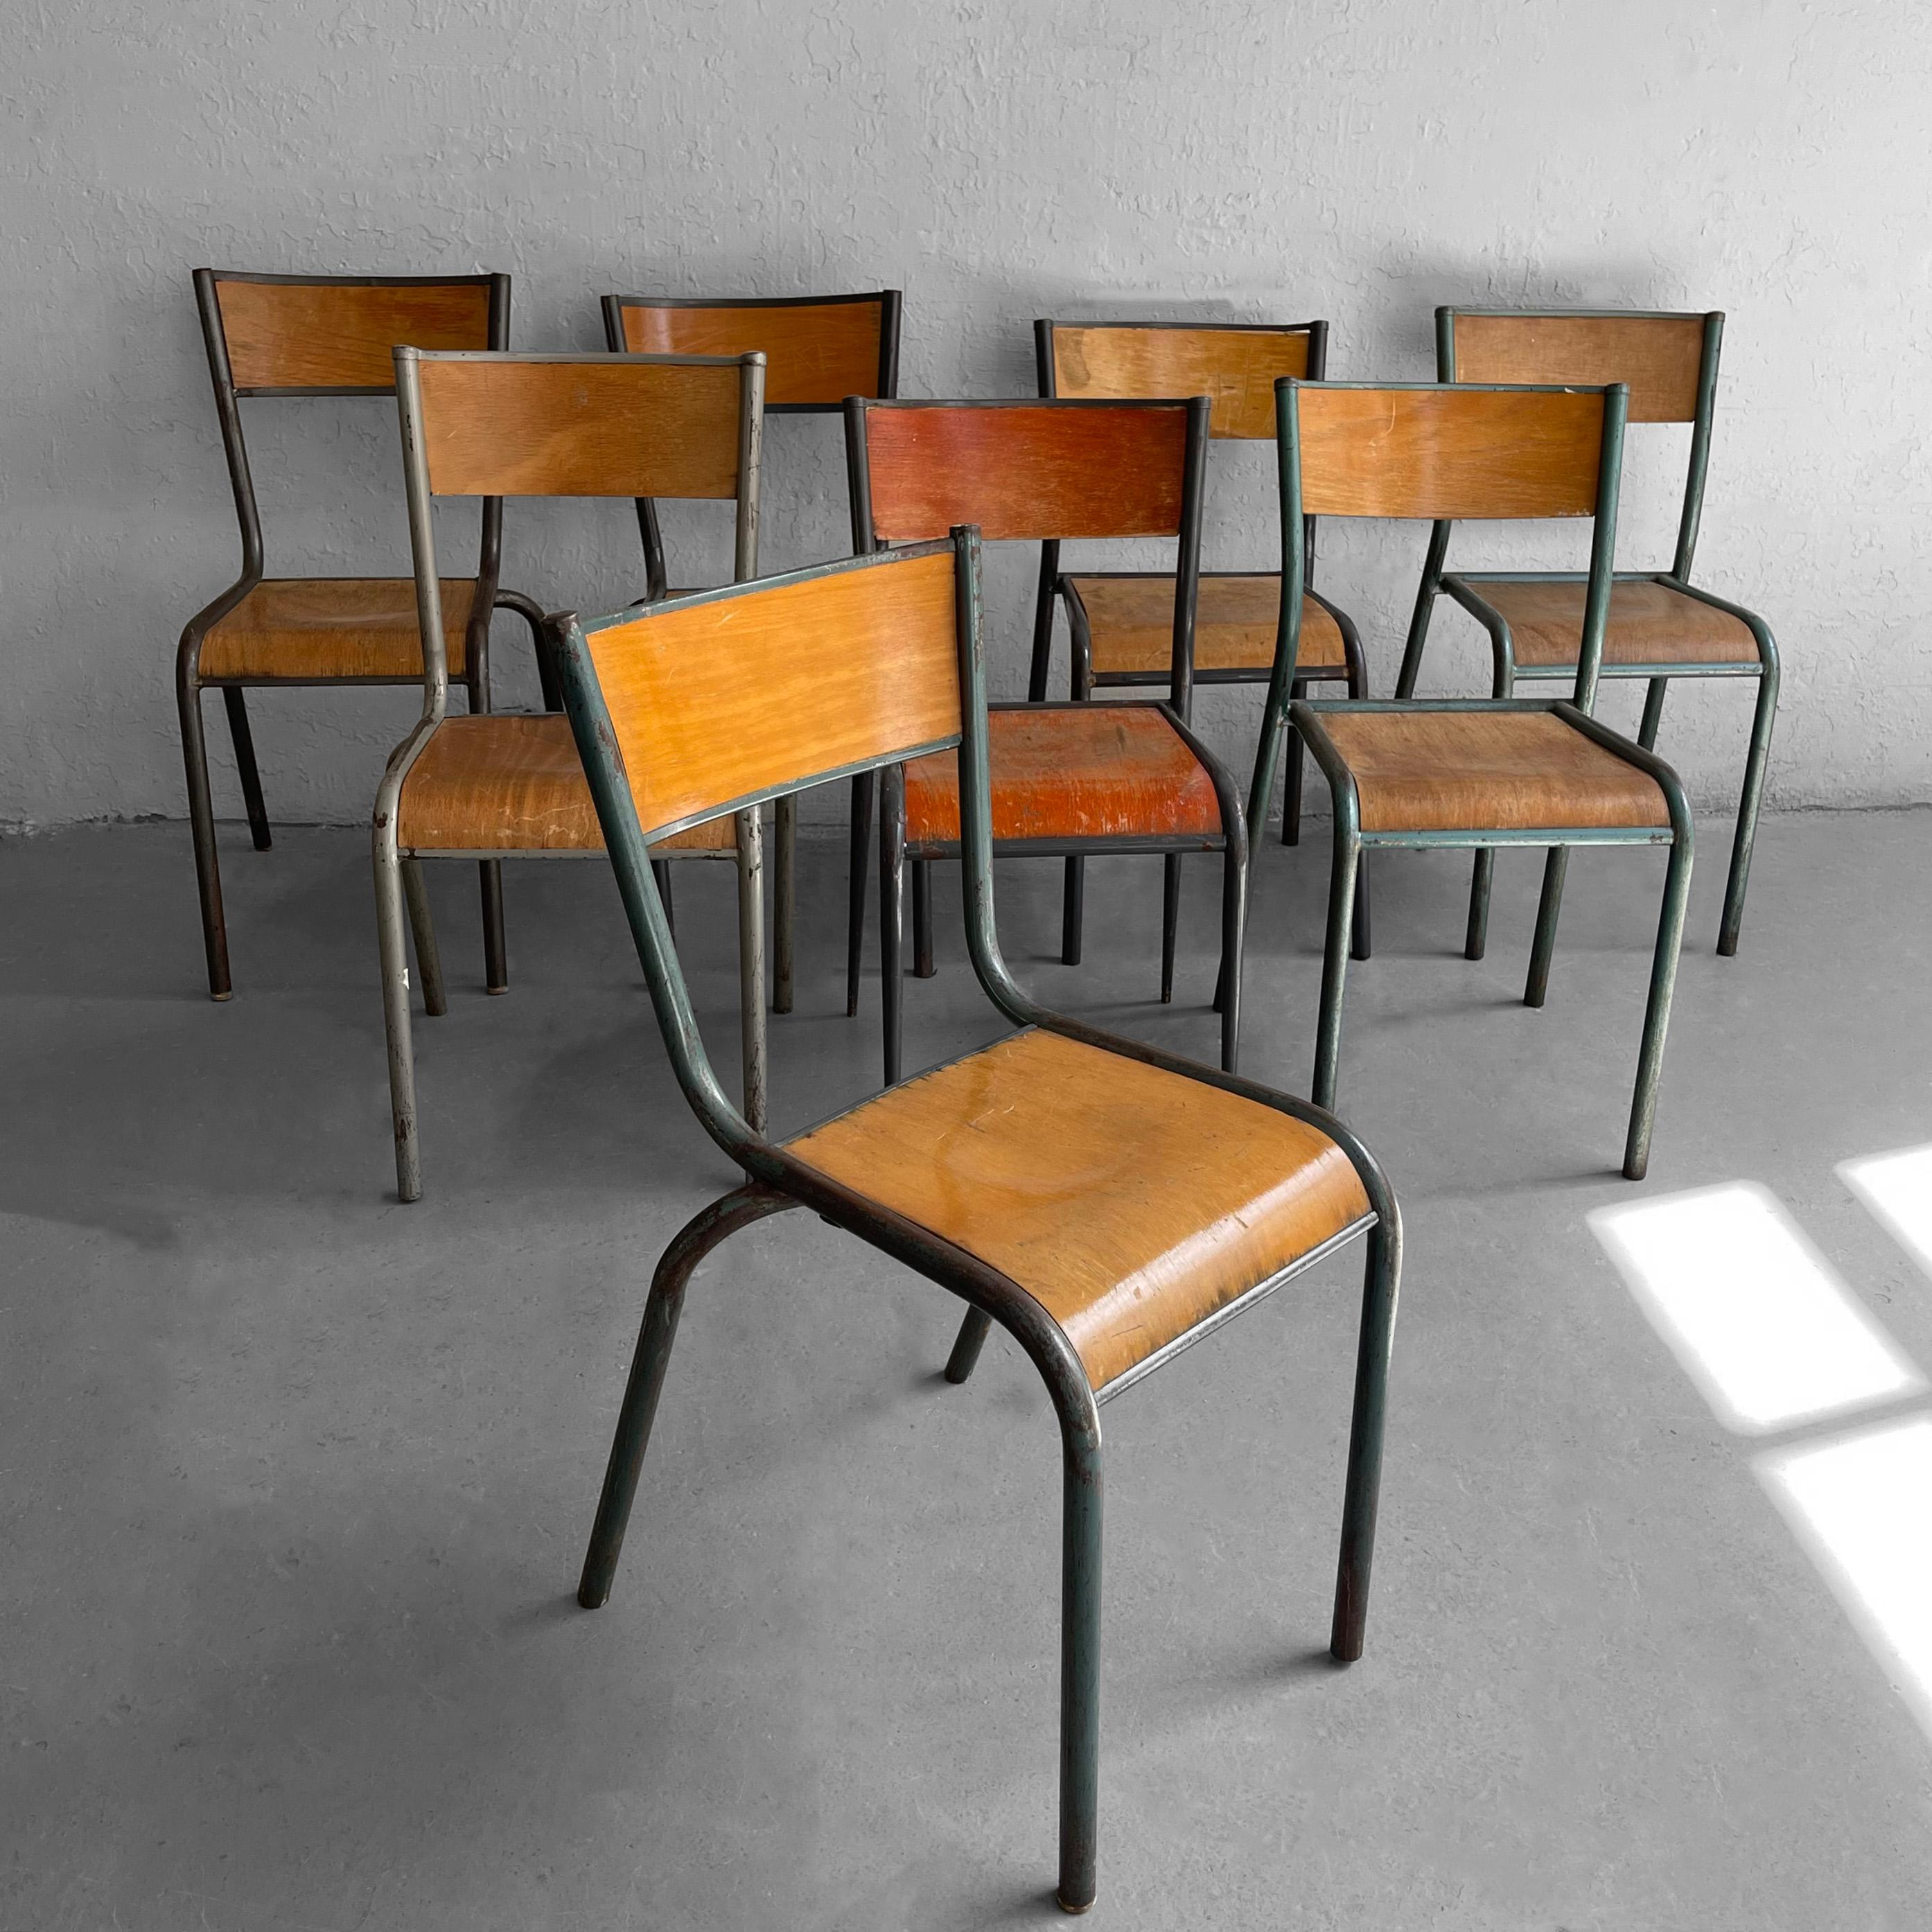 20th Century Rustic Industrial Stackable School Side Chairs For Sale